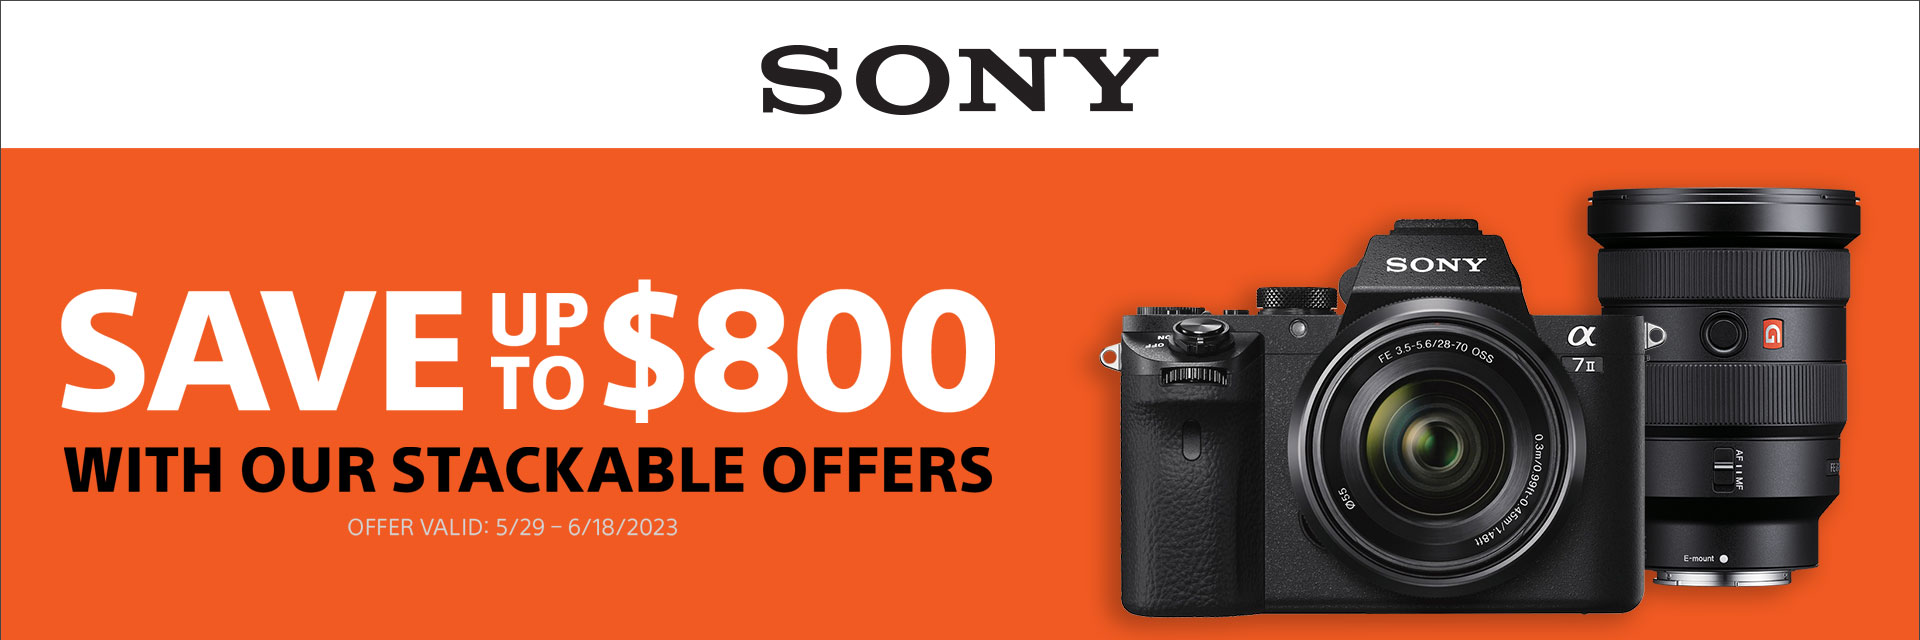 Sony Stackable Offers